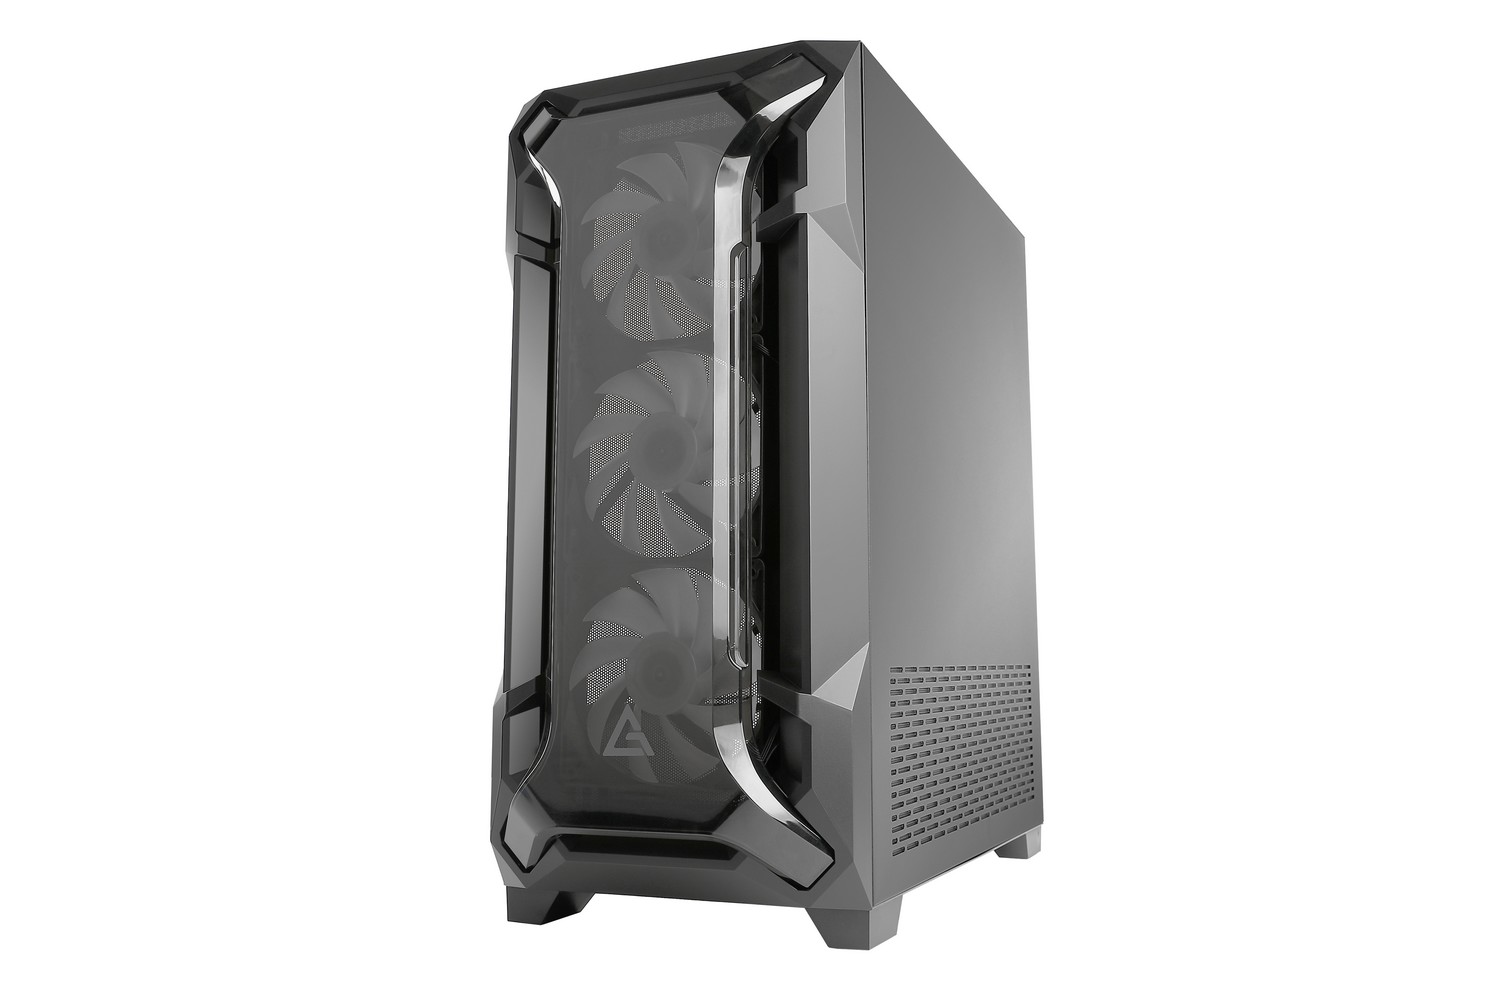 DF600 FLUX: Antec’s New Gaming Case features Industry-leading Design of